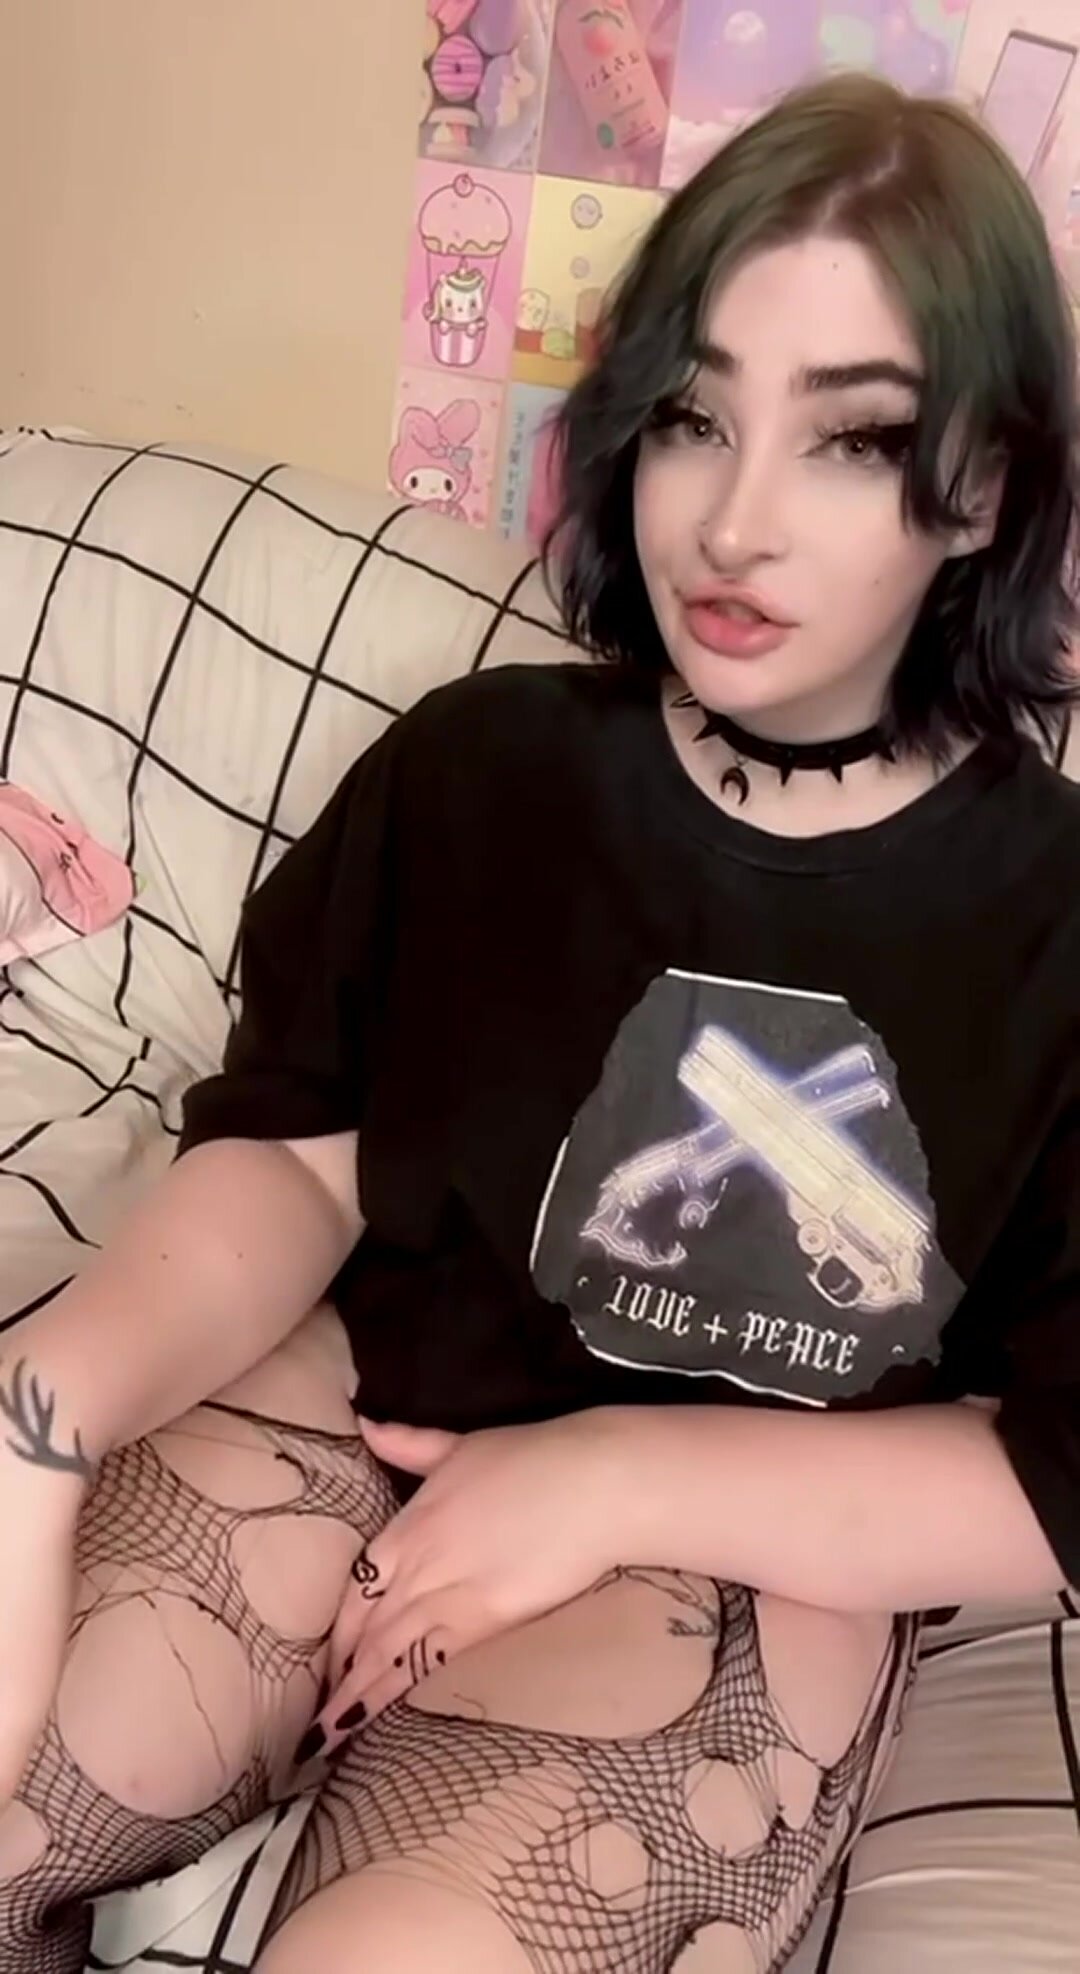 Be honest.. would you suck off a goth girl?